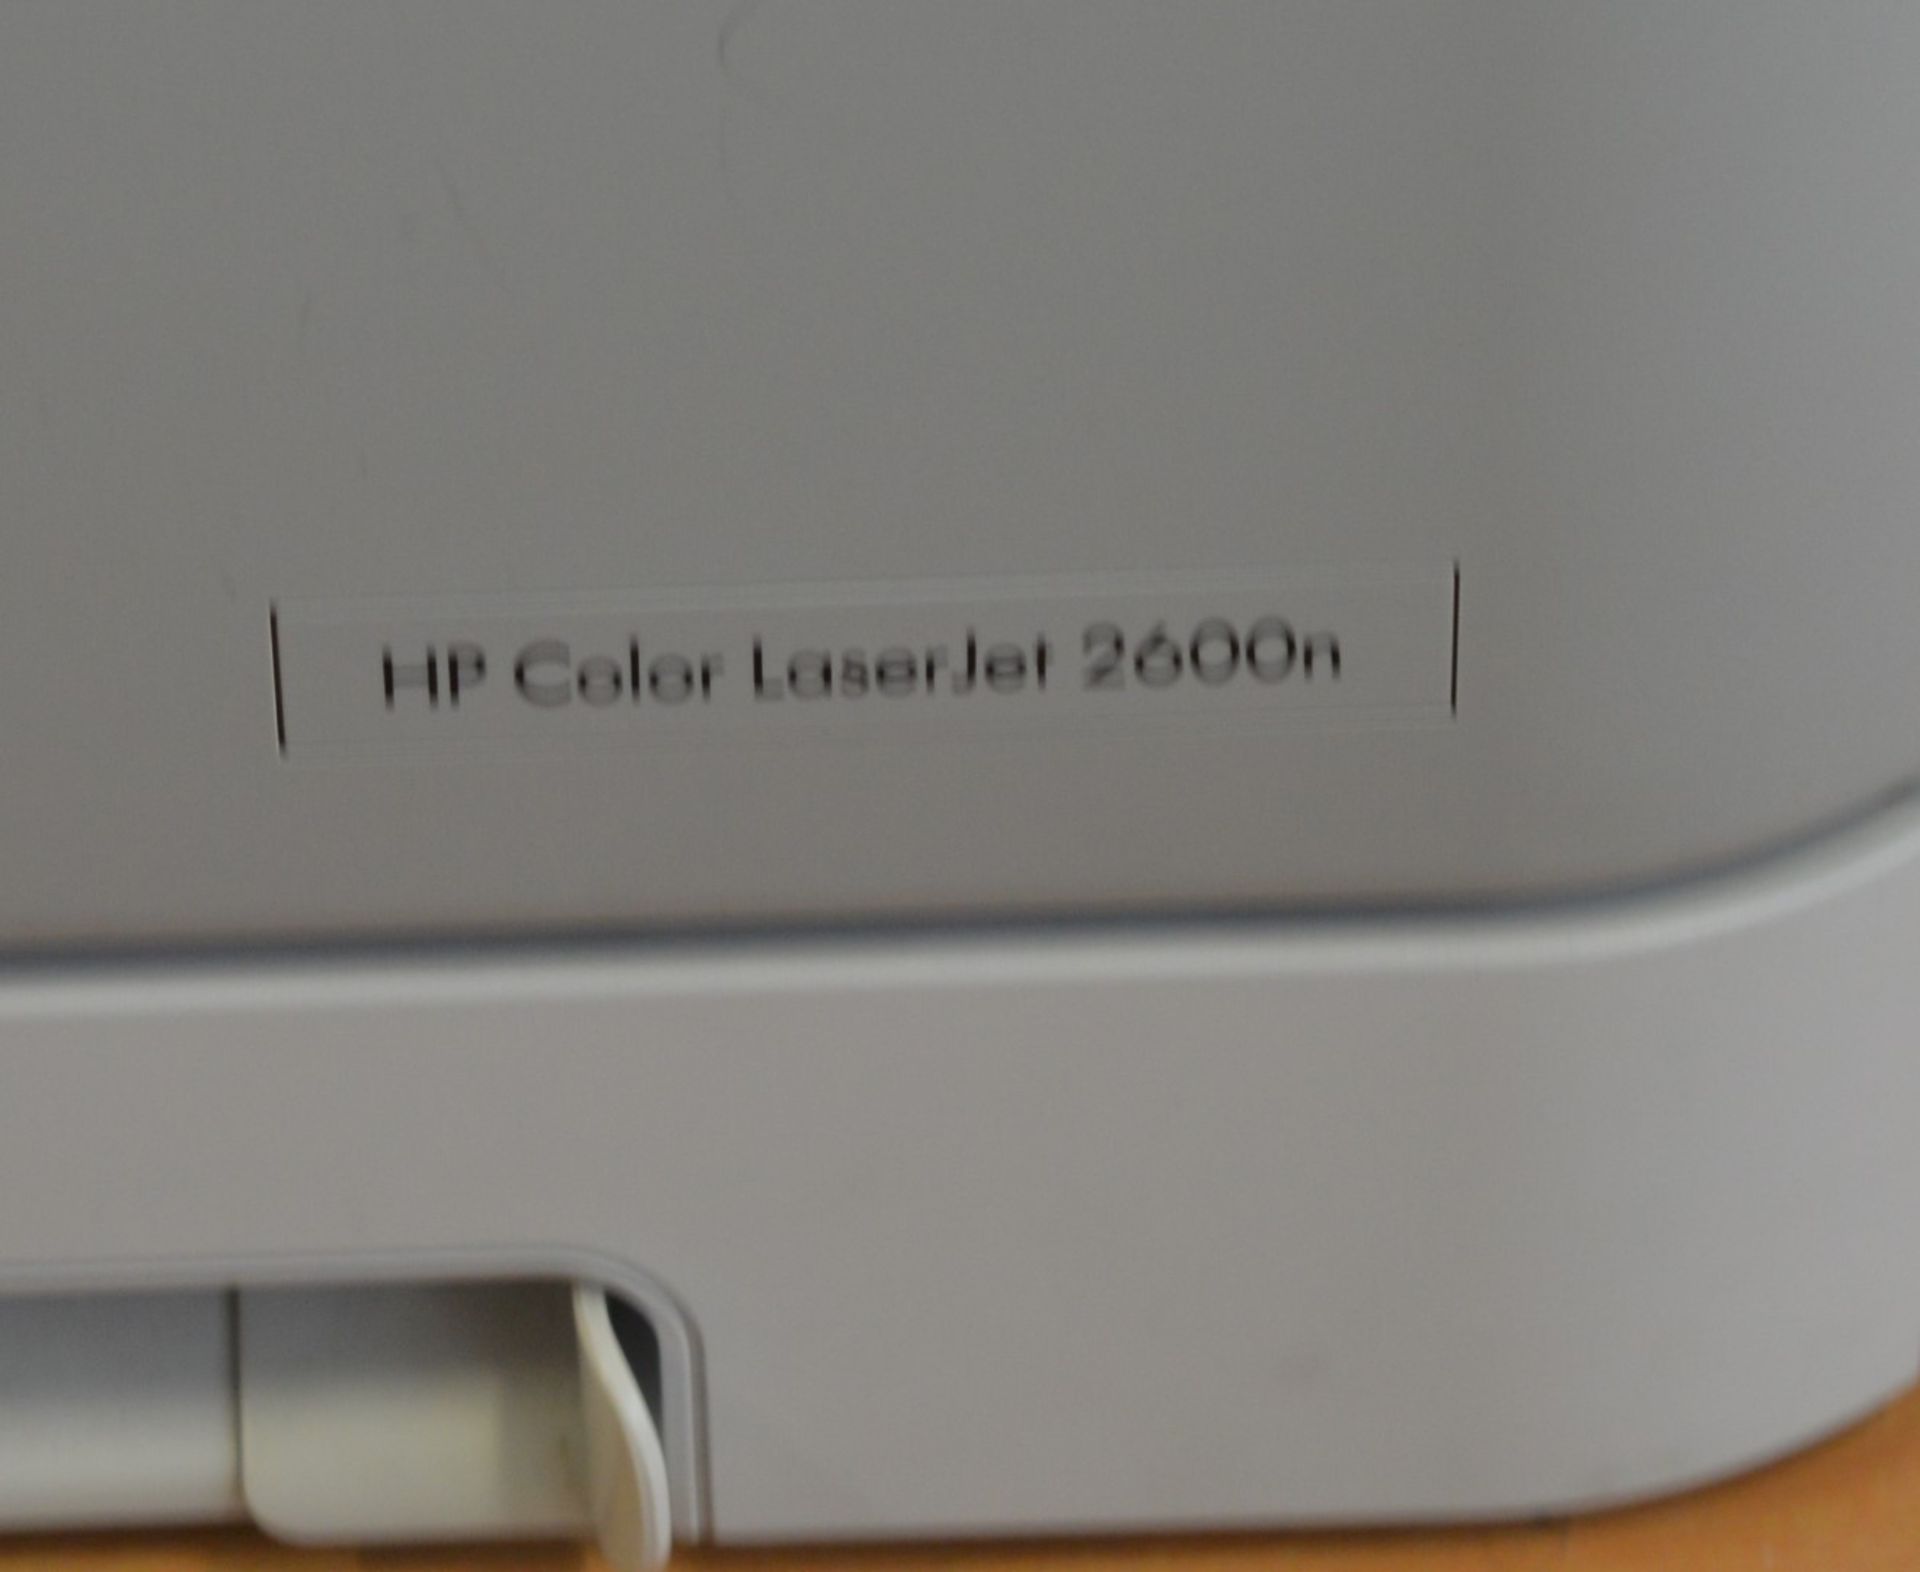 1 x HP Colour Laserjet Office Printer - Model 2600n - From Working Office Environment - Quickly - Image 2 of 3